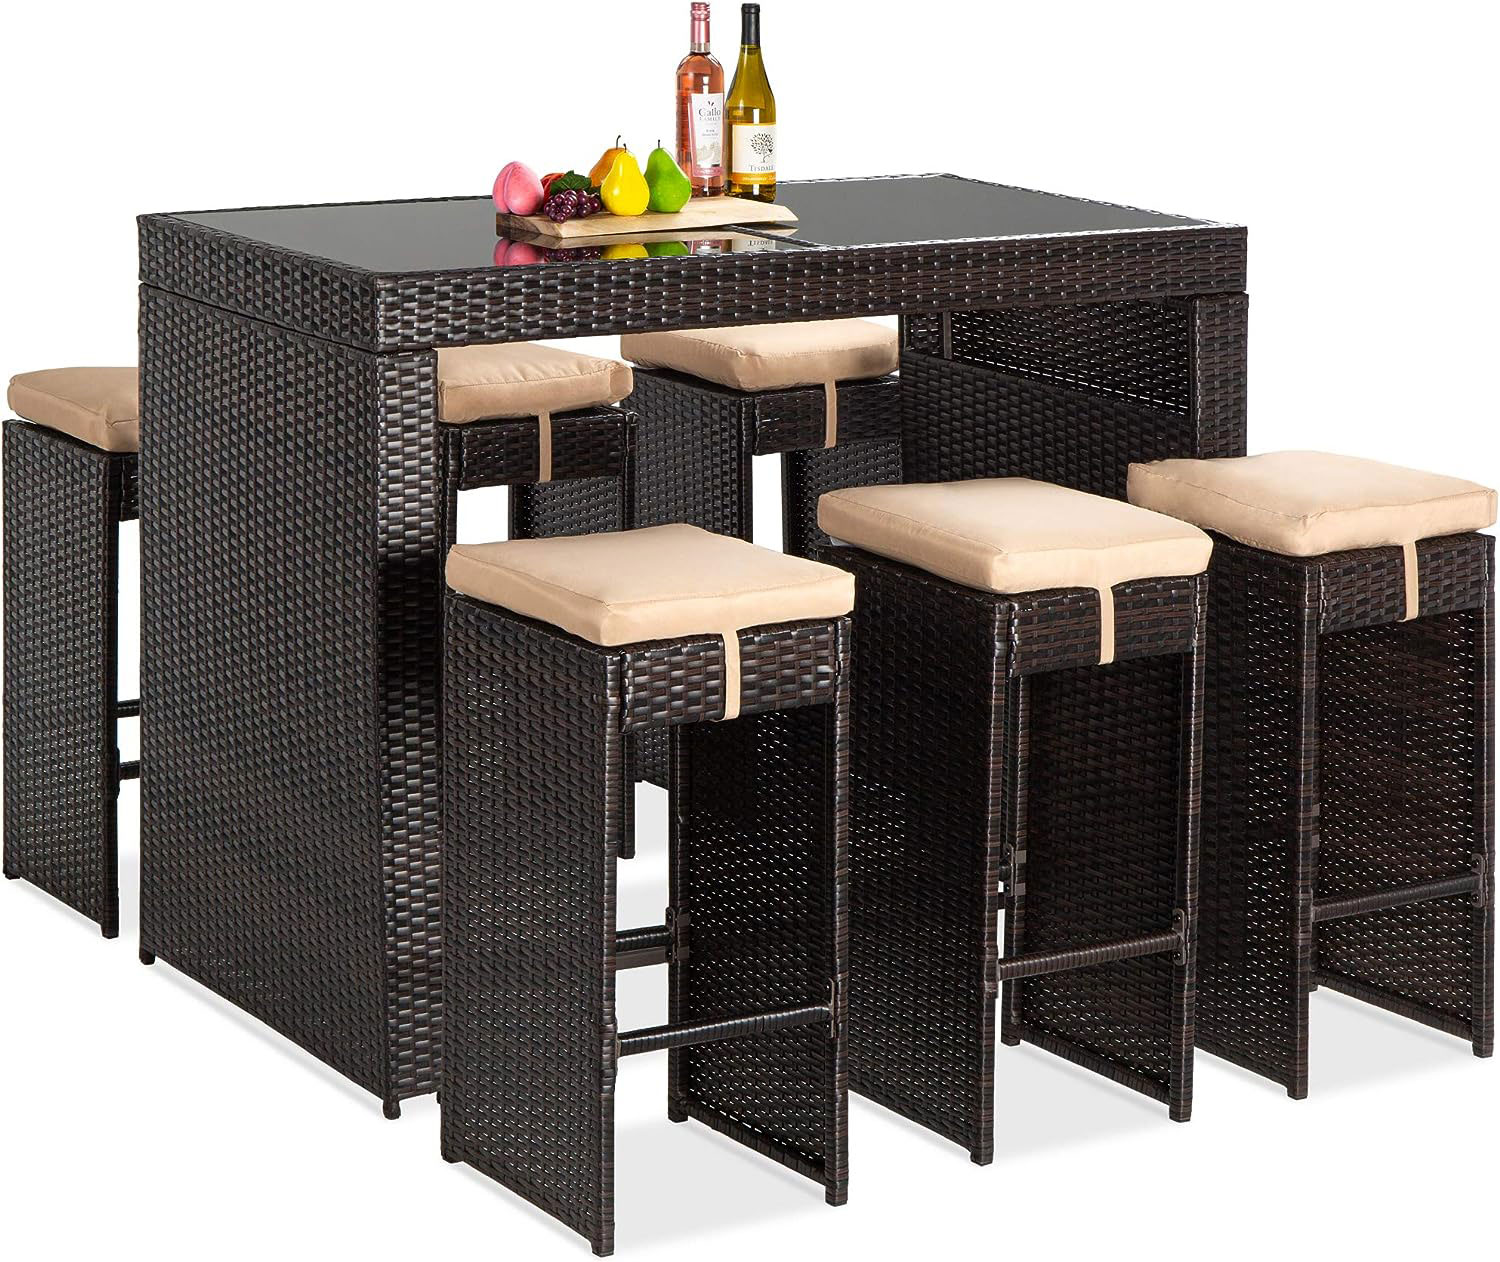 Outdoor Wicker Bar Dining Set by Best Choice Products - Review